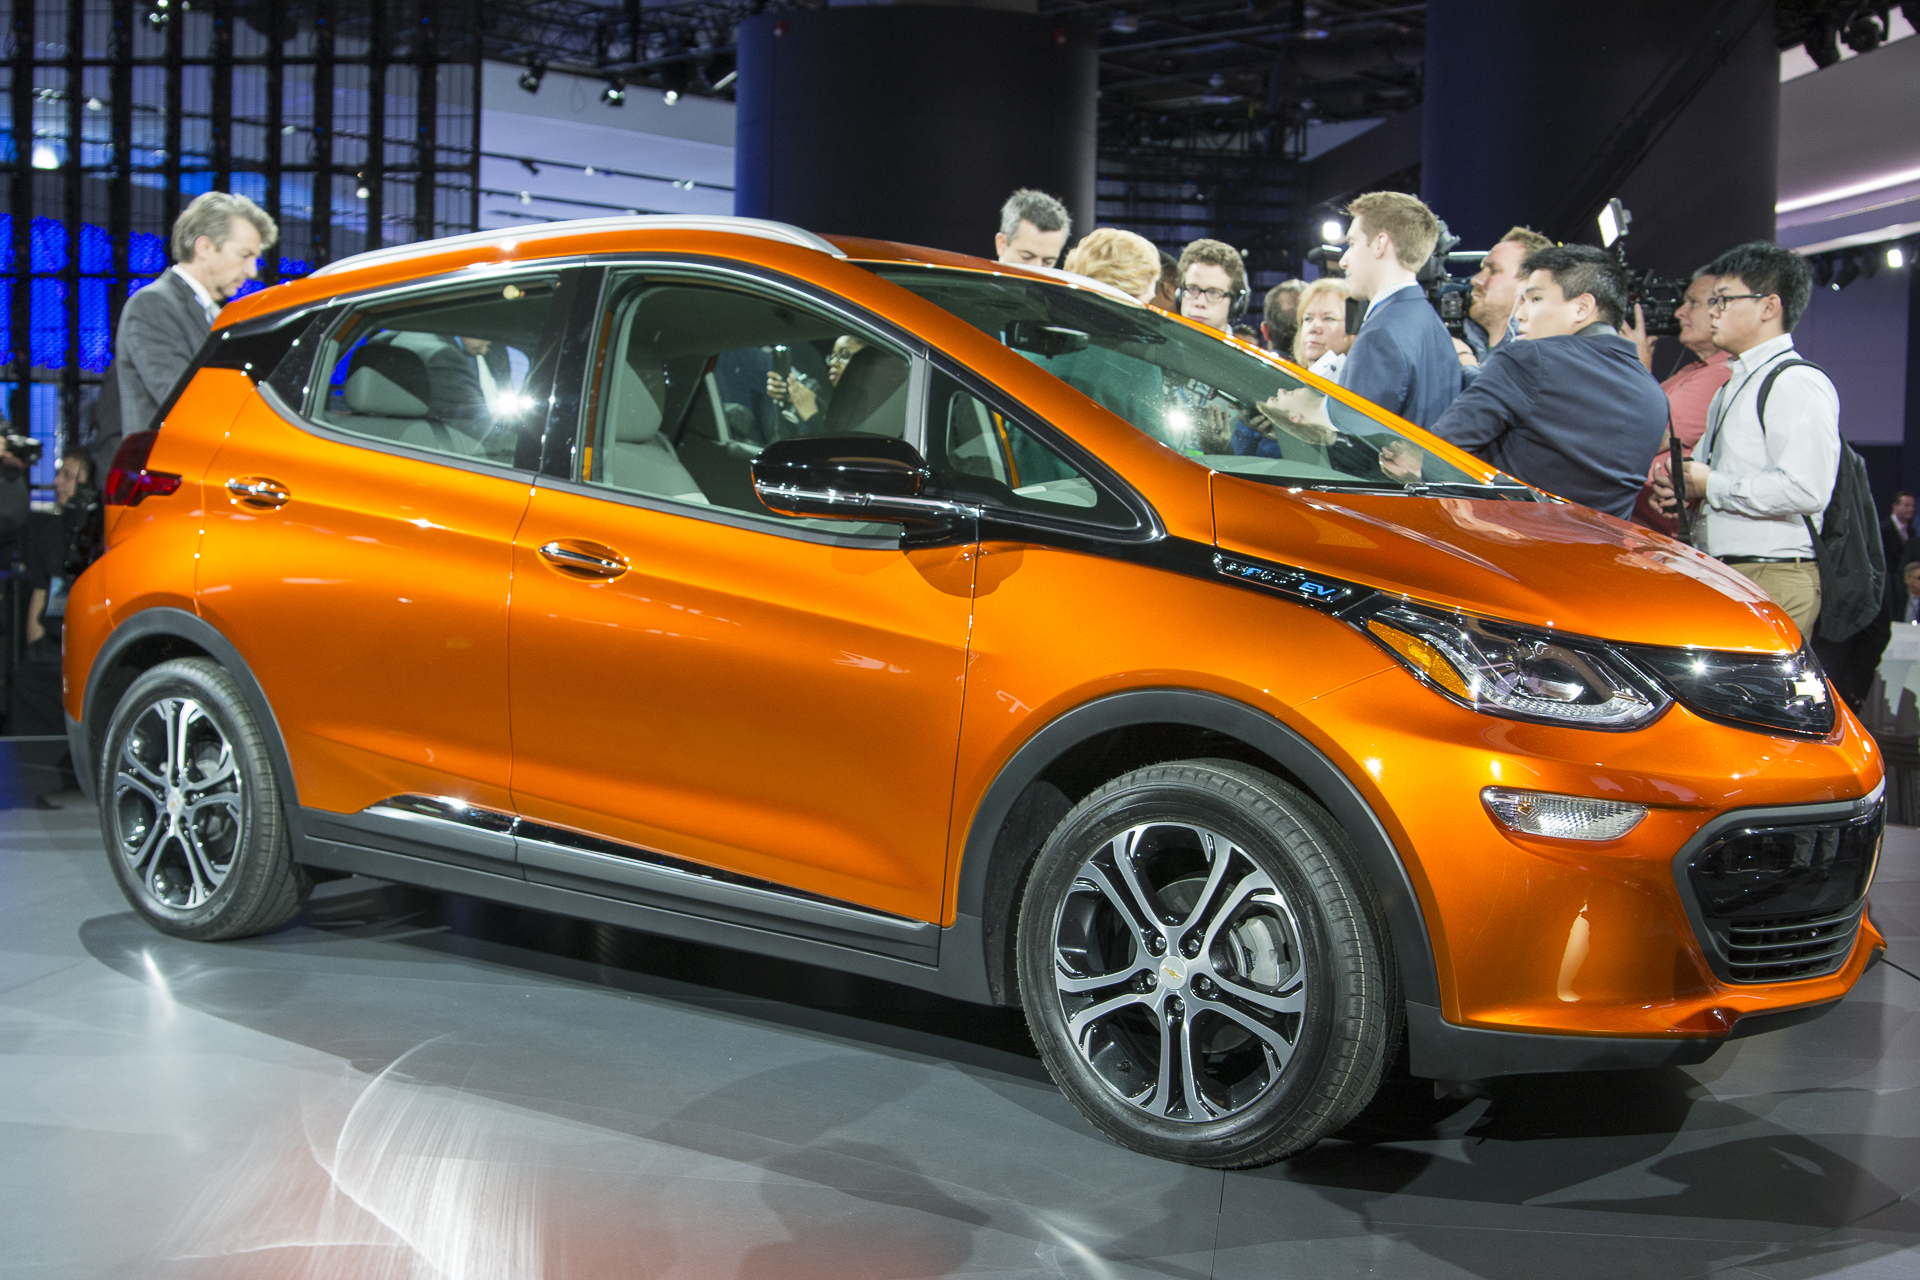 Chevy Bolt EV goes on sale nationally a month early